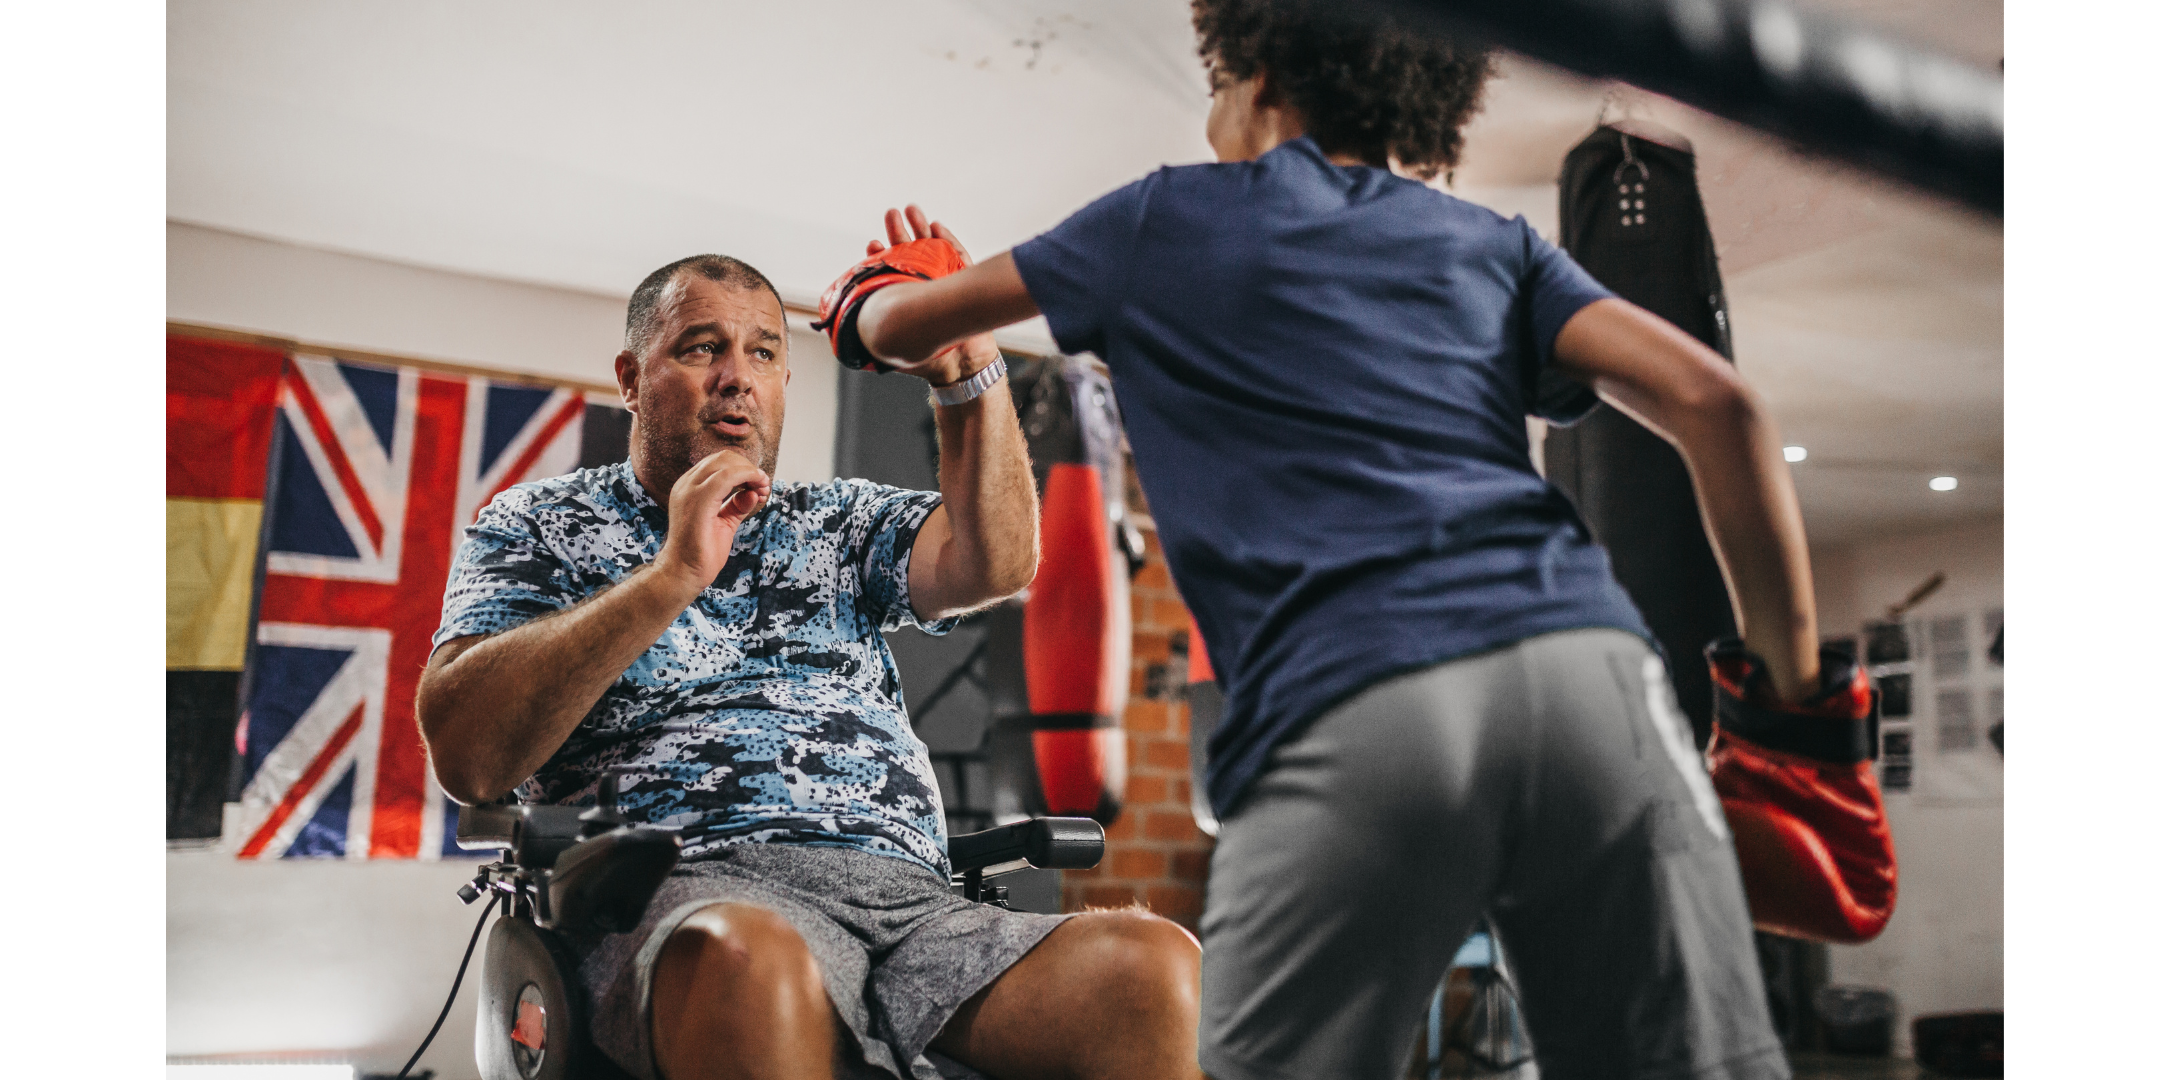 A young person is practicing boxing. An older man, using a wheelchair is helping them by holding his hands up in front of him